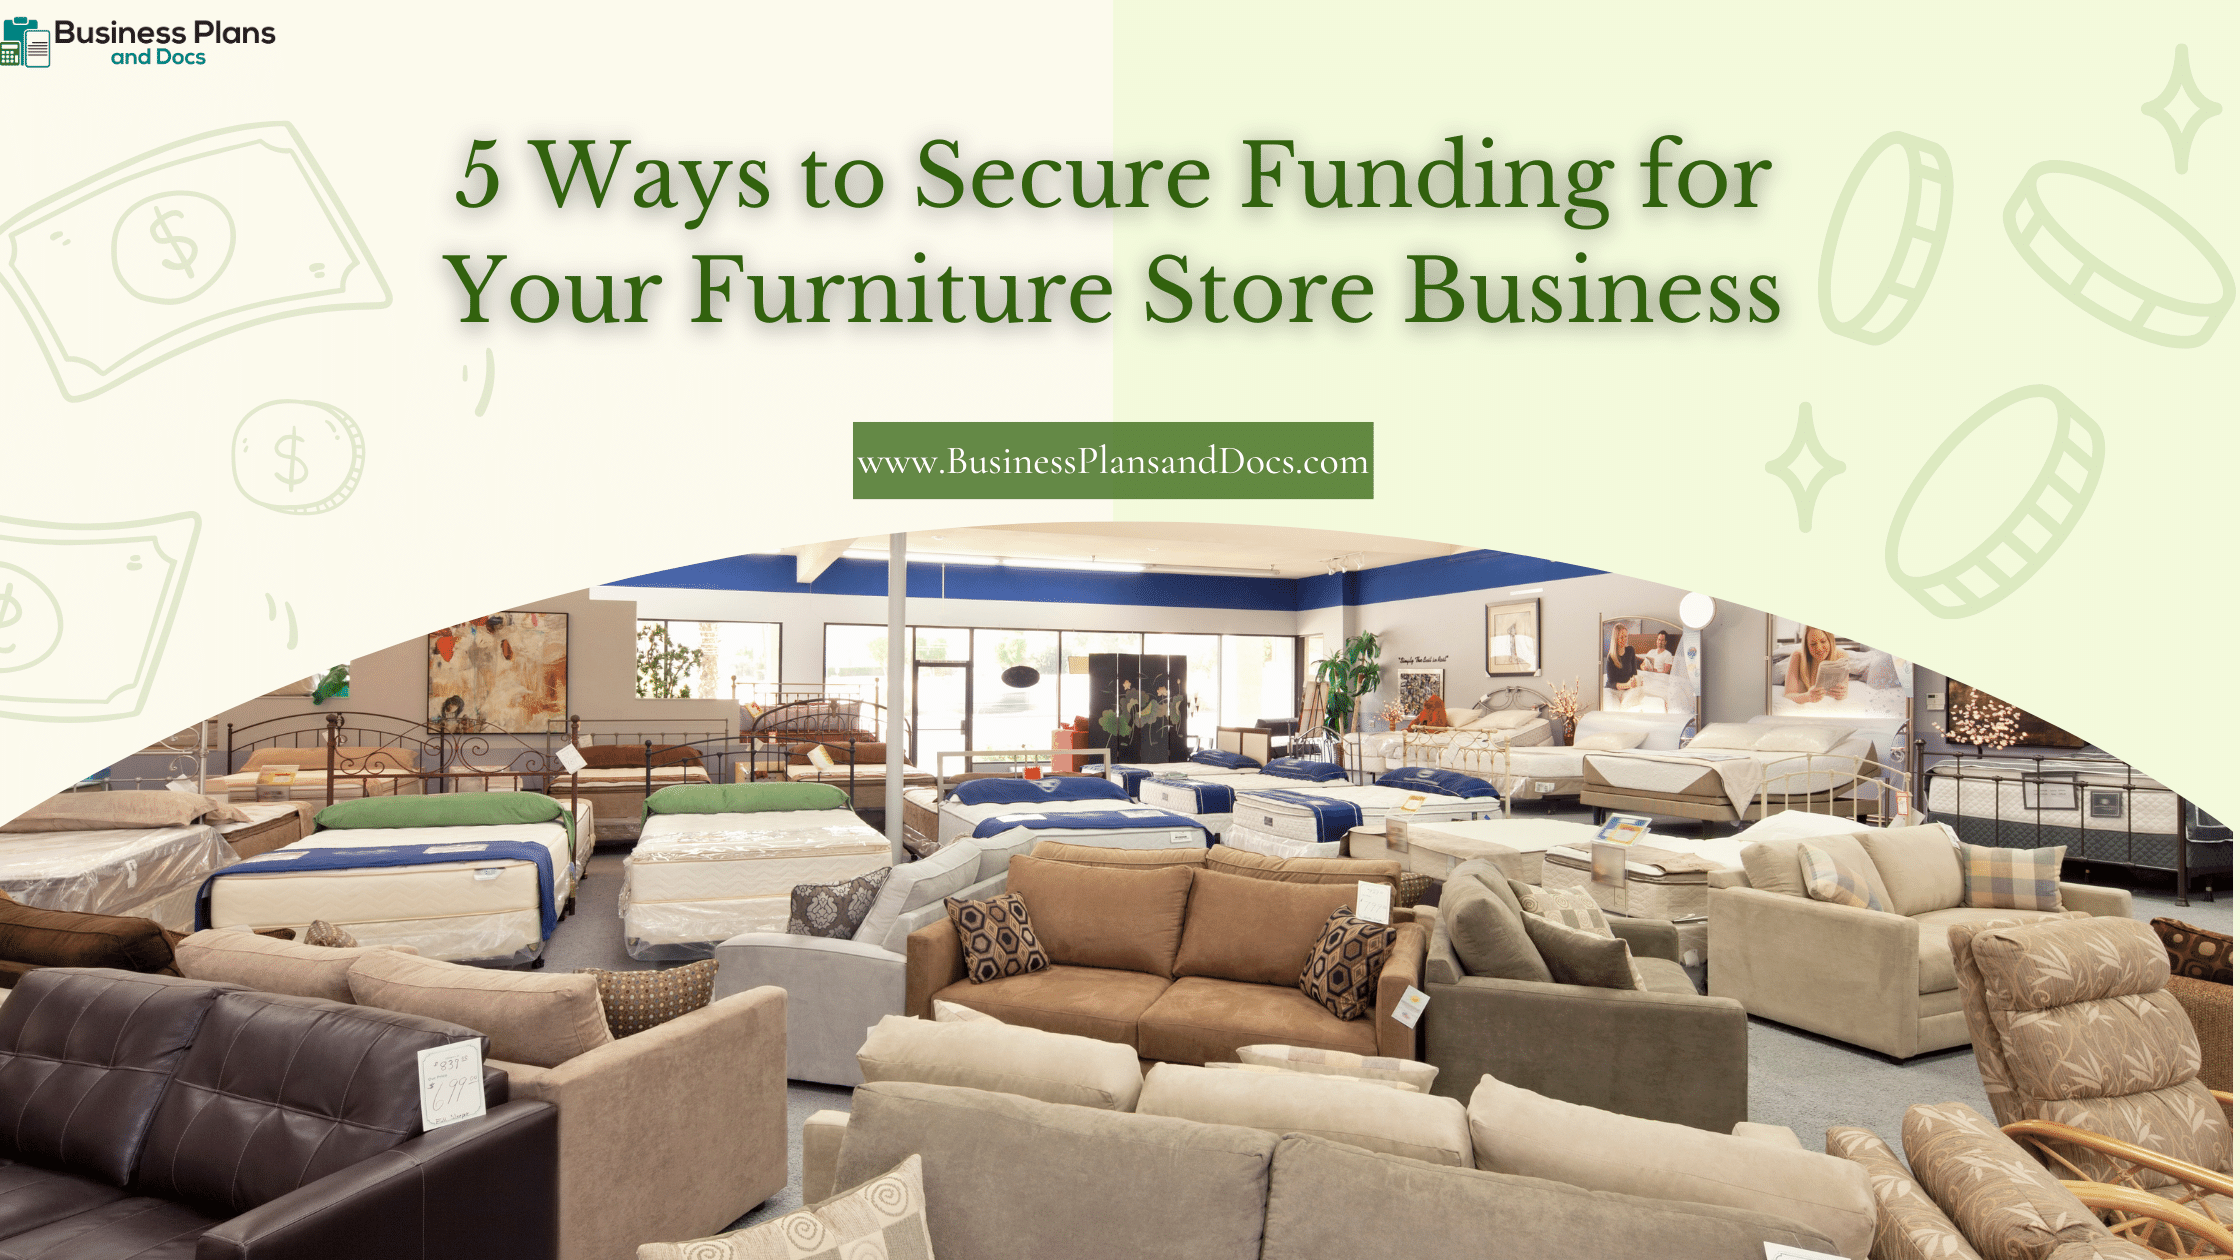 5 Ways to Secure Funding for Your Furniture Store Business